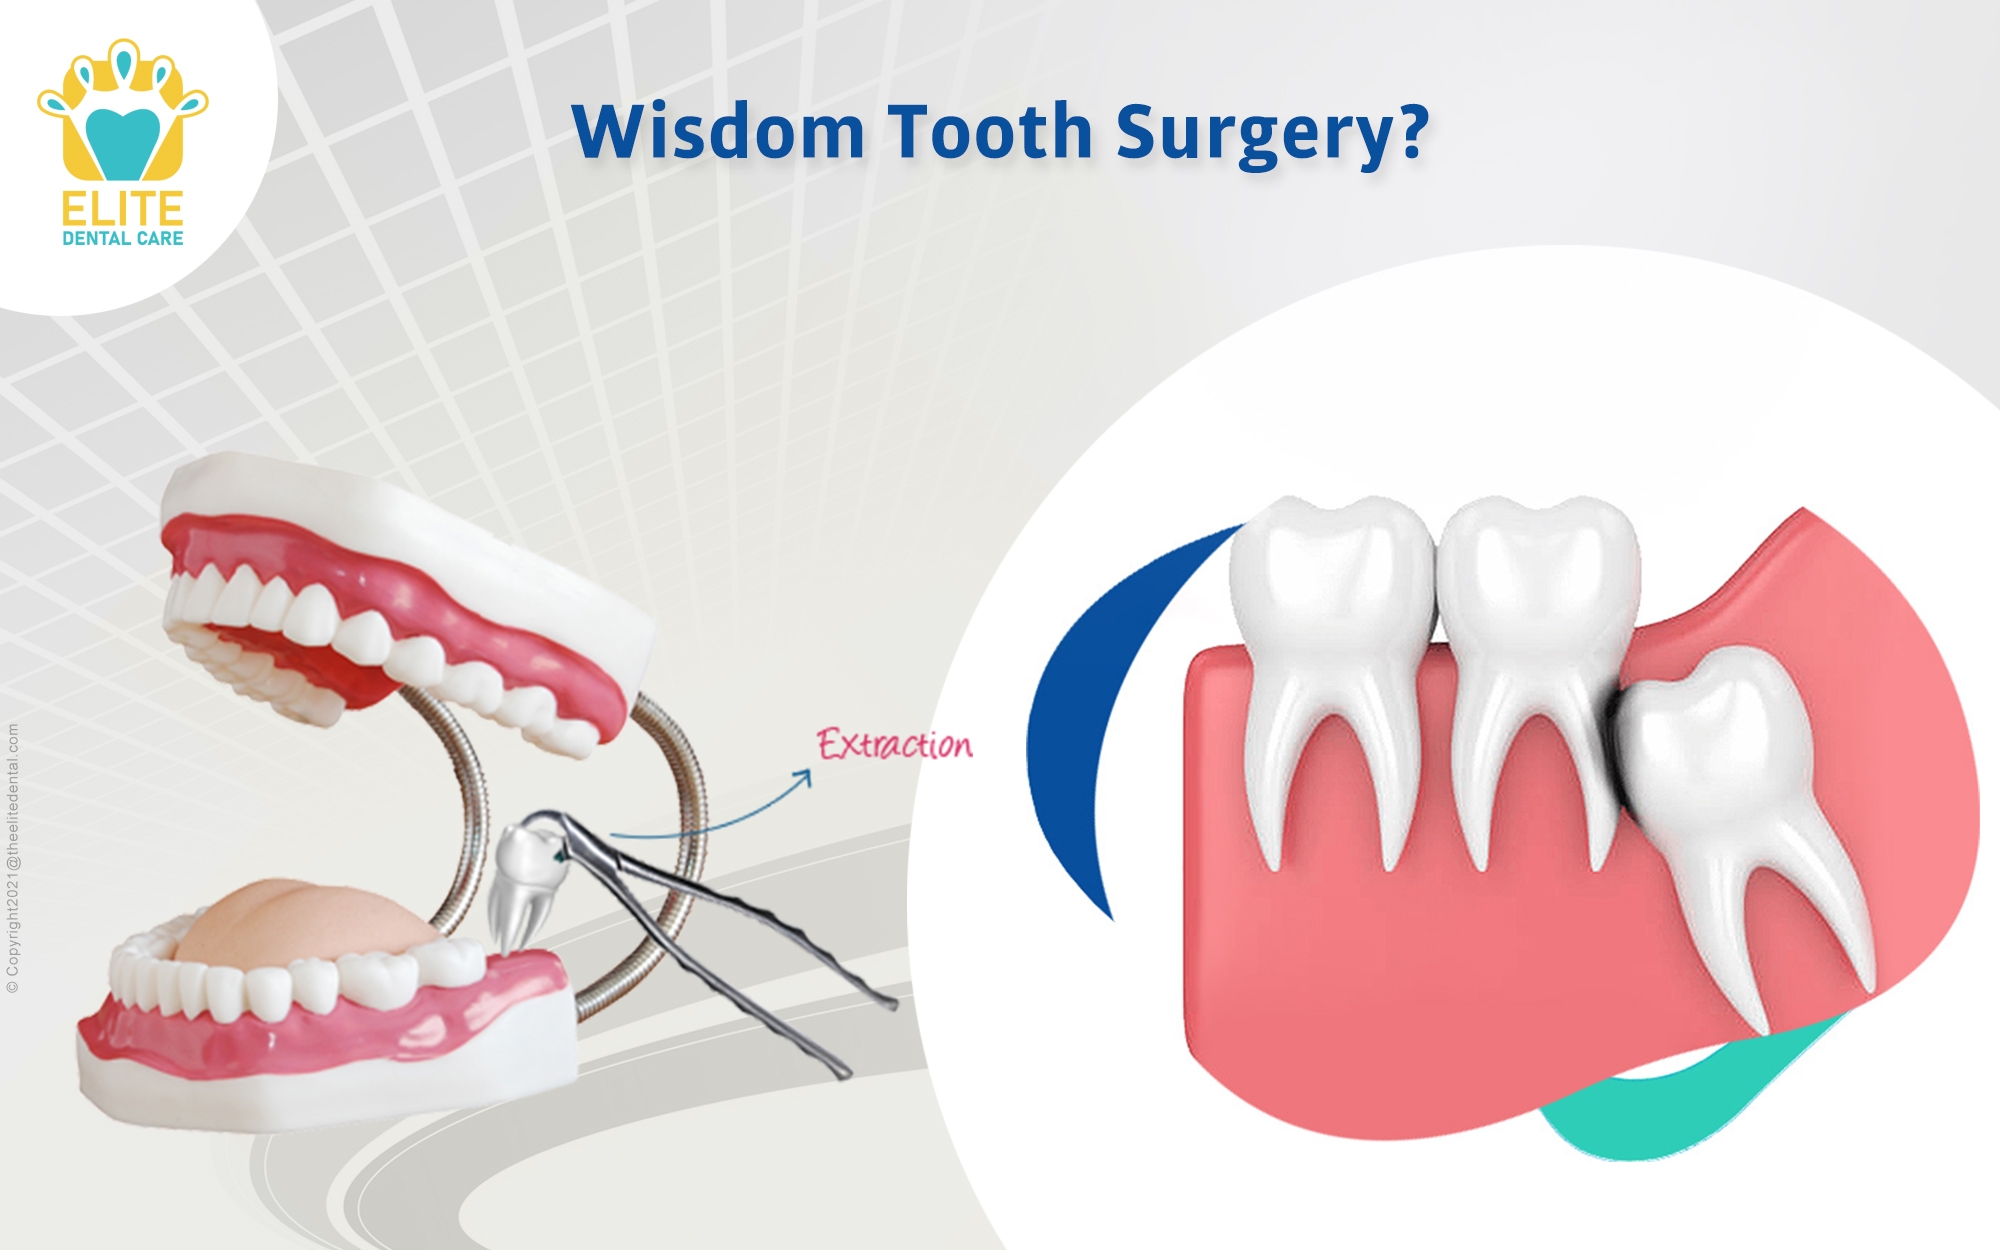 Is wisdom tooth removal a major surgery?